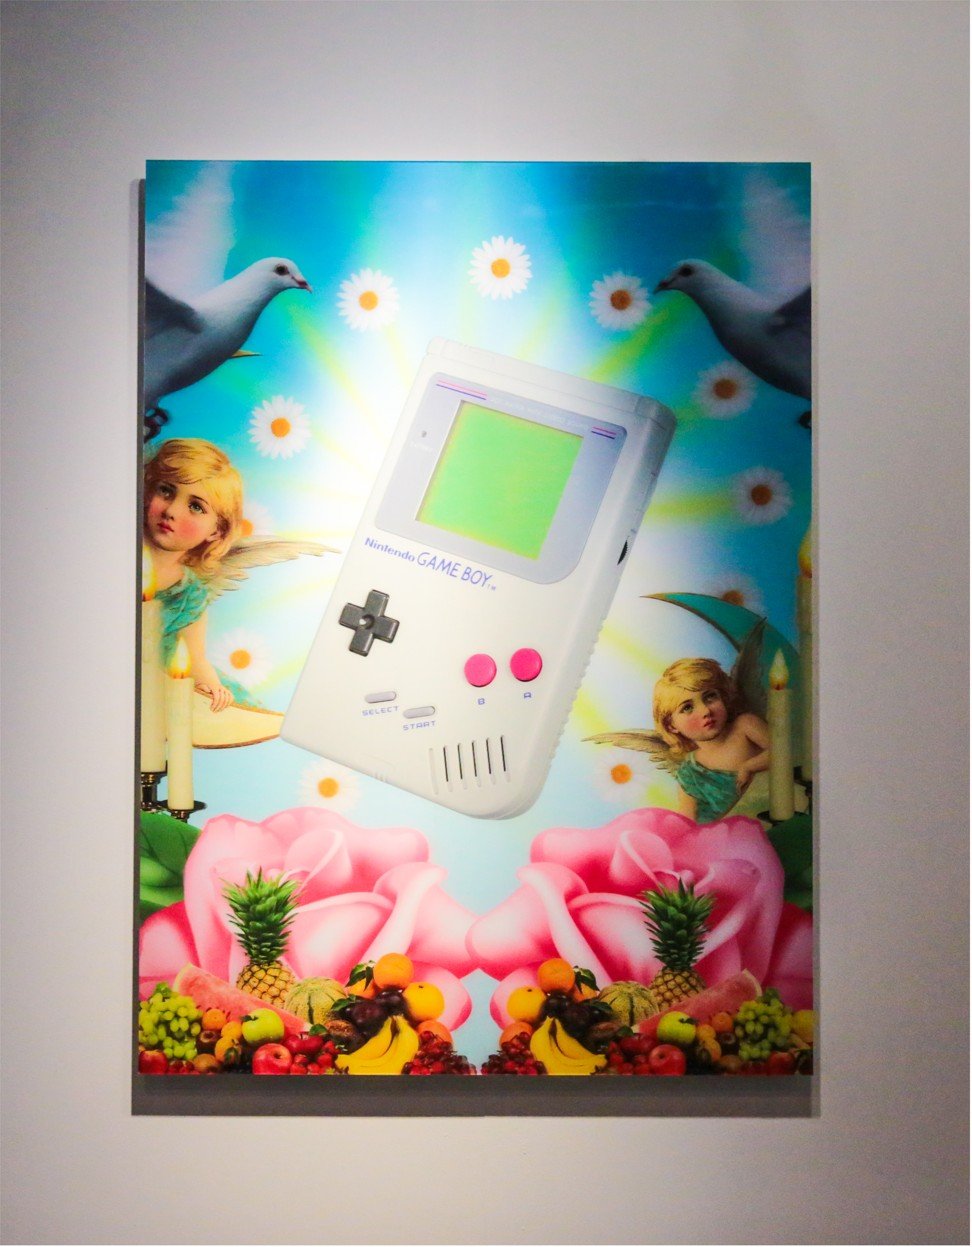 ‘Relic’ (Gameboy) by Mak Ying Tung